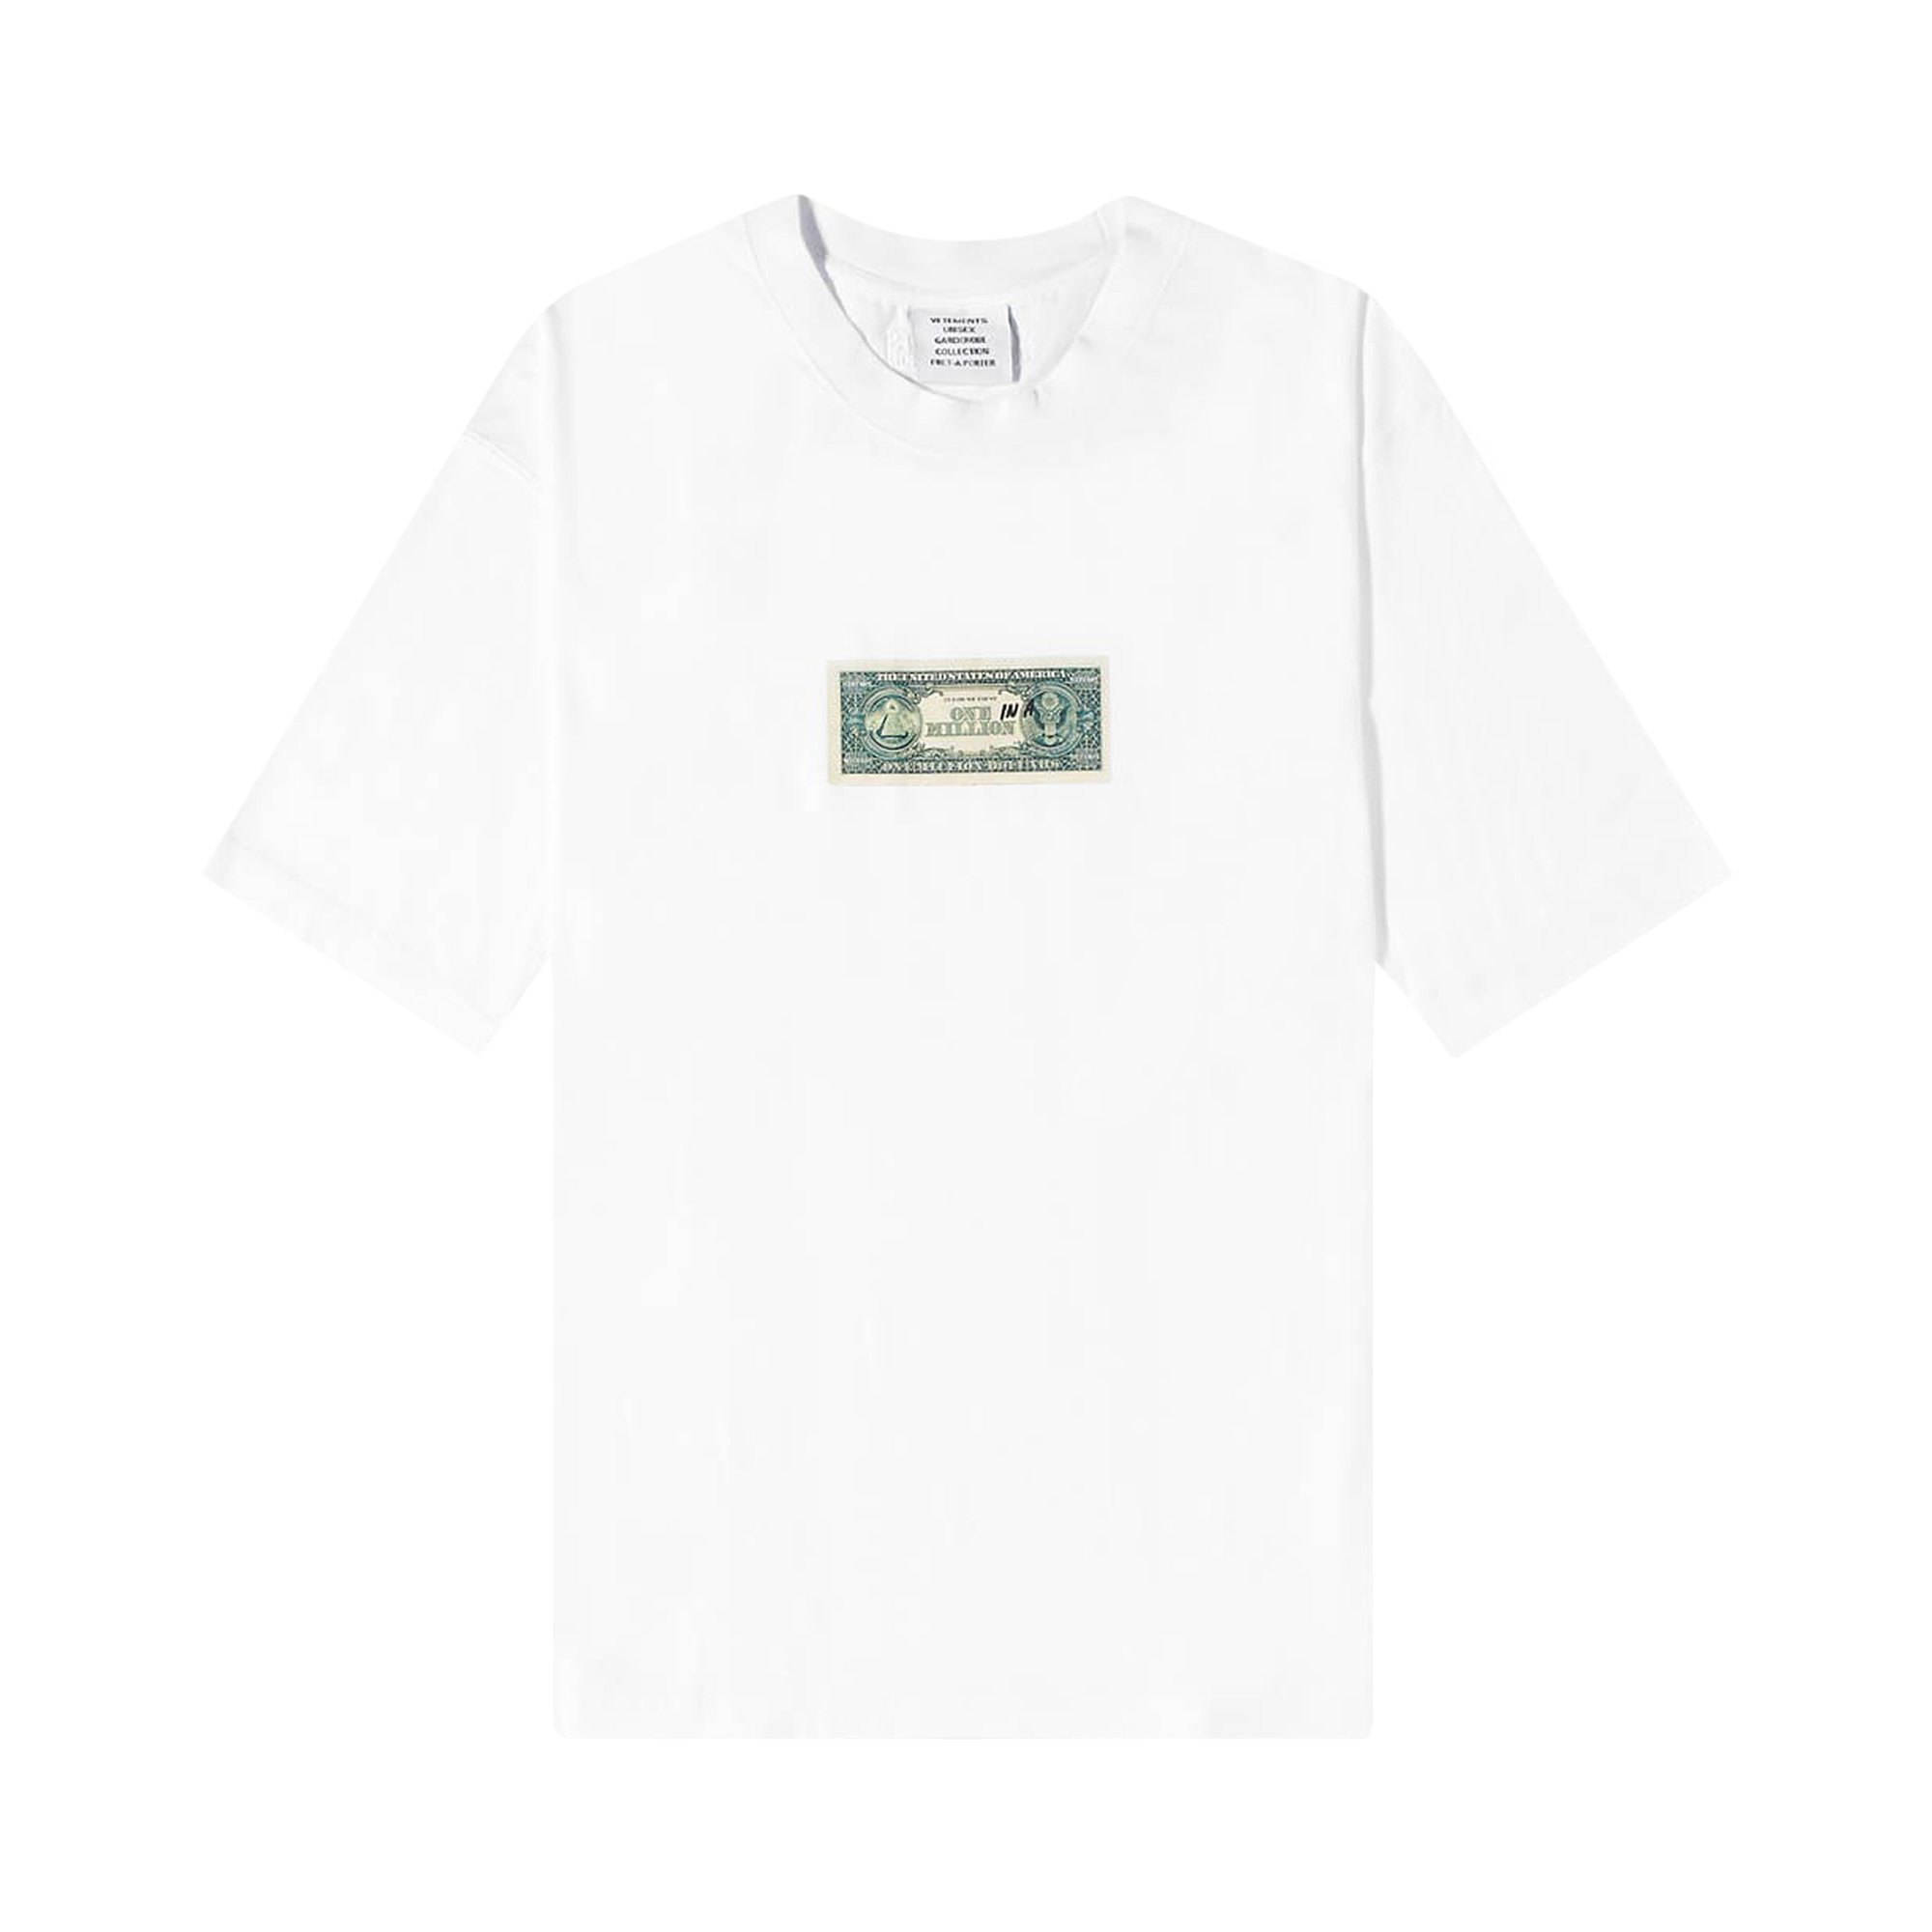 Buy Vetements One In A Million T-Shirt 'White' - UA53TR140W WHIT